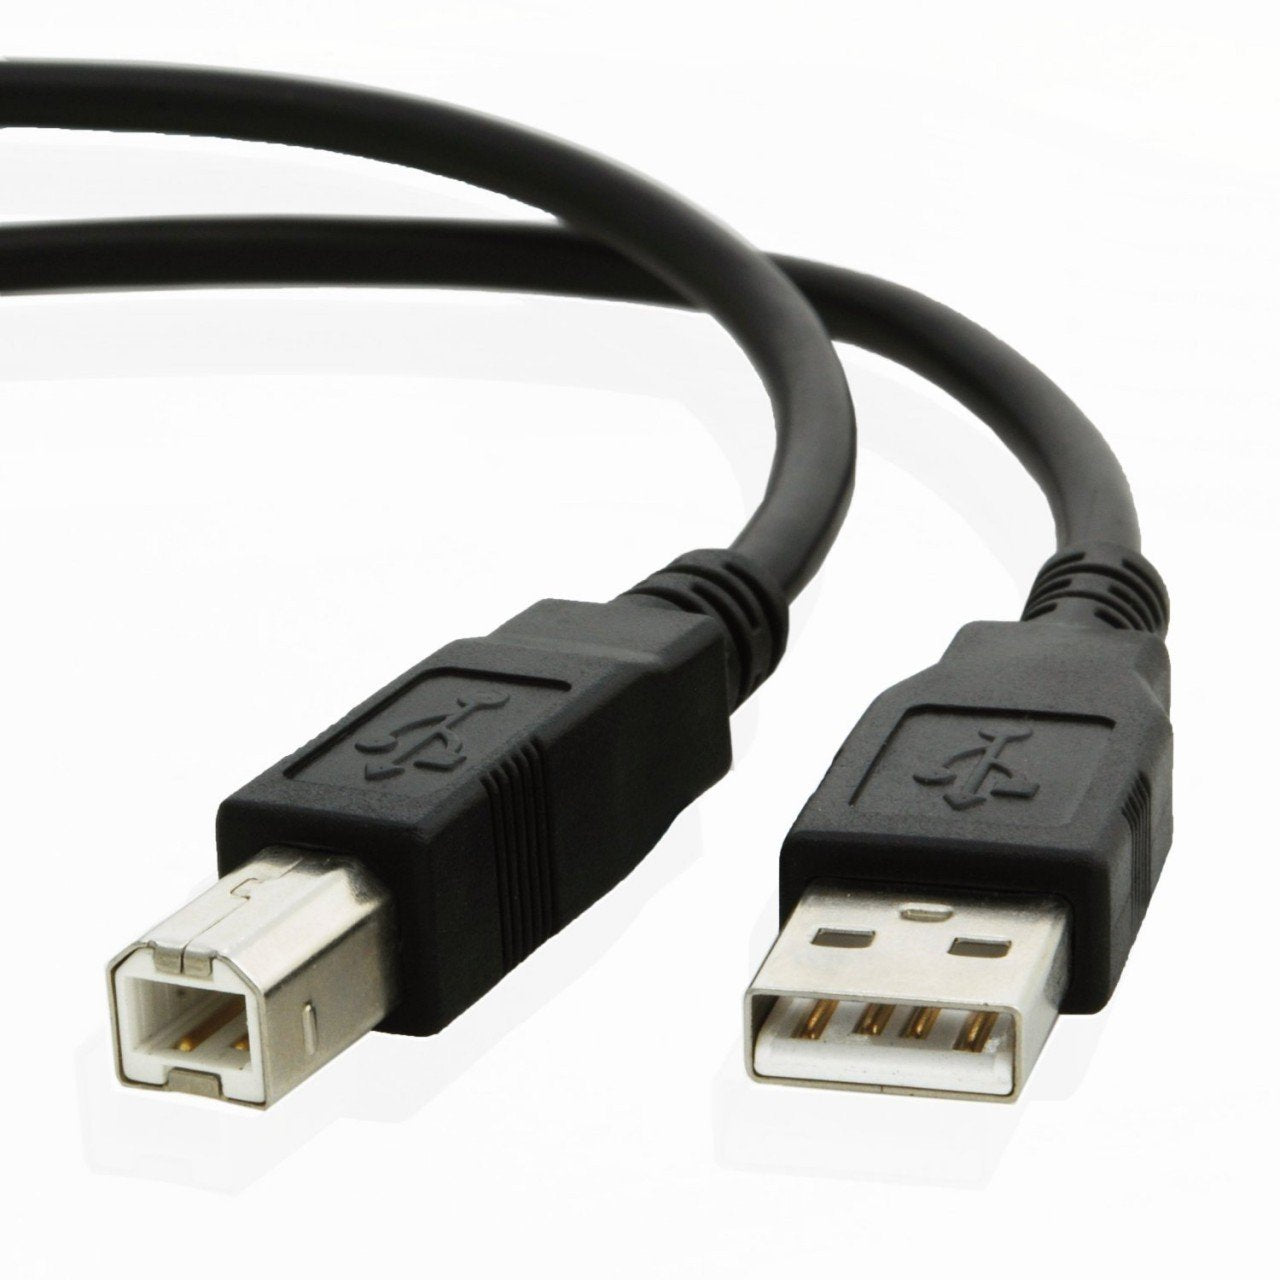 USB cable for Dell S5830dn